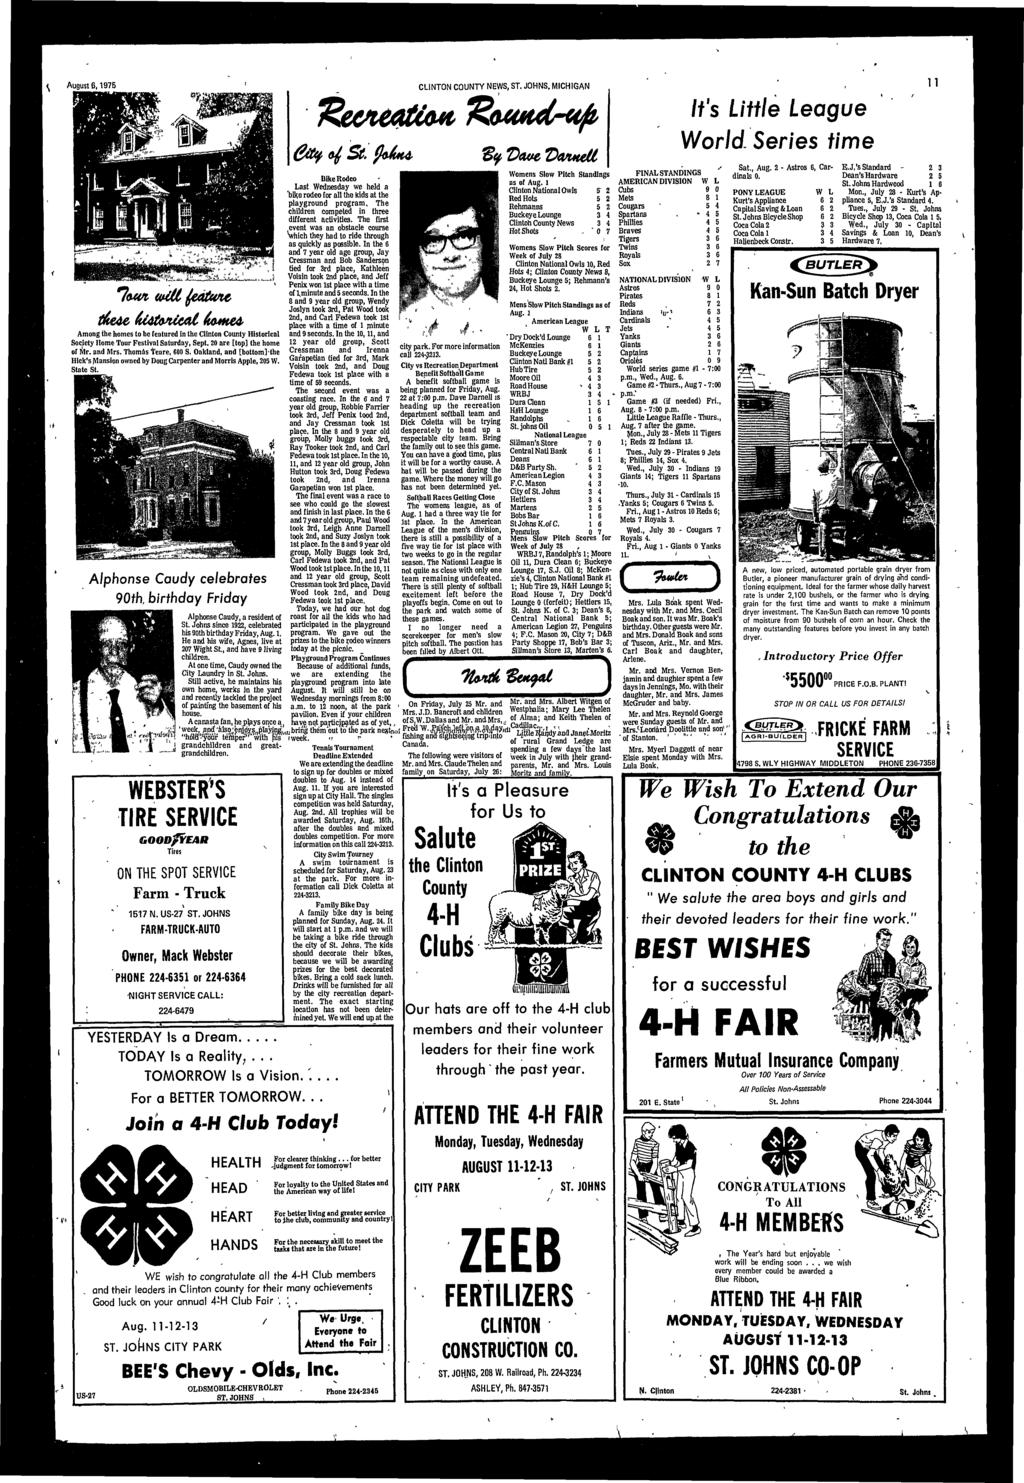 August,1975 CLINTON COUNTY NEWS, ST. JOHNS. MICHIGAN 11 Among the homes to be featured n the Clnton County Hstorcal Socety Home Tour Festval Saturday, Sept, 20 are [top] the home or Mr. and Mrs.